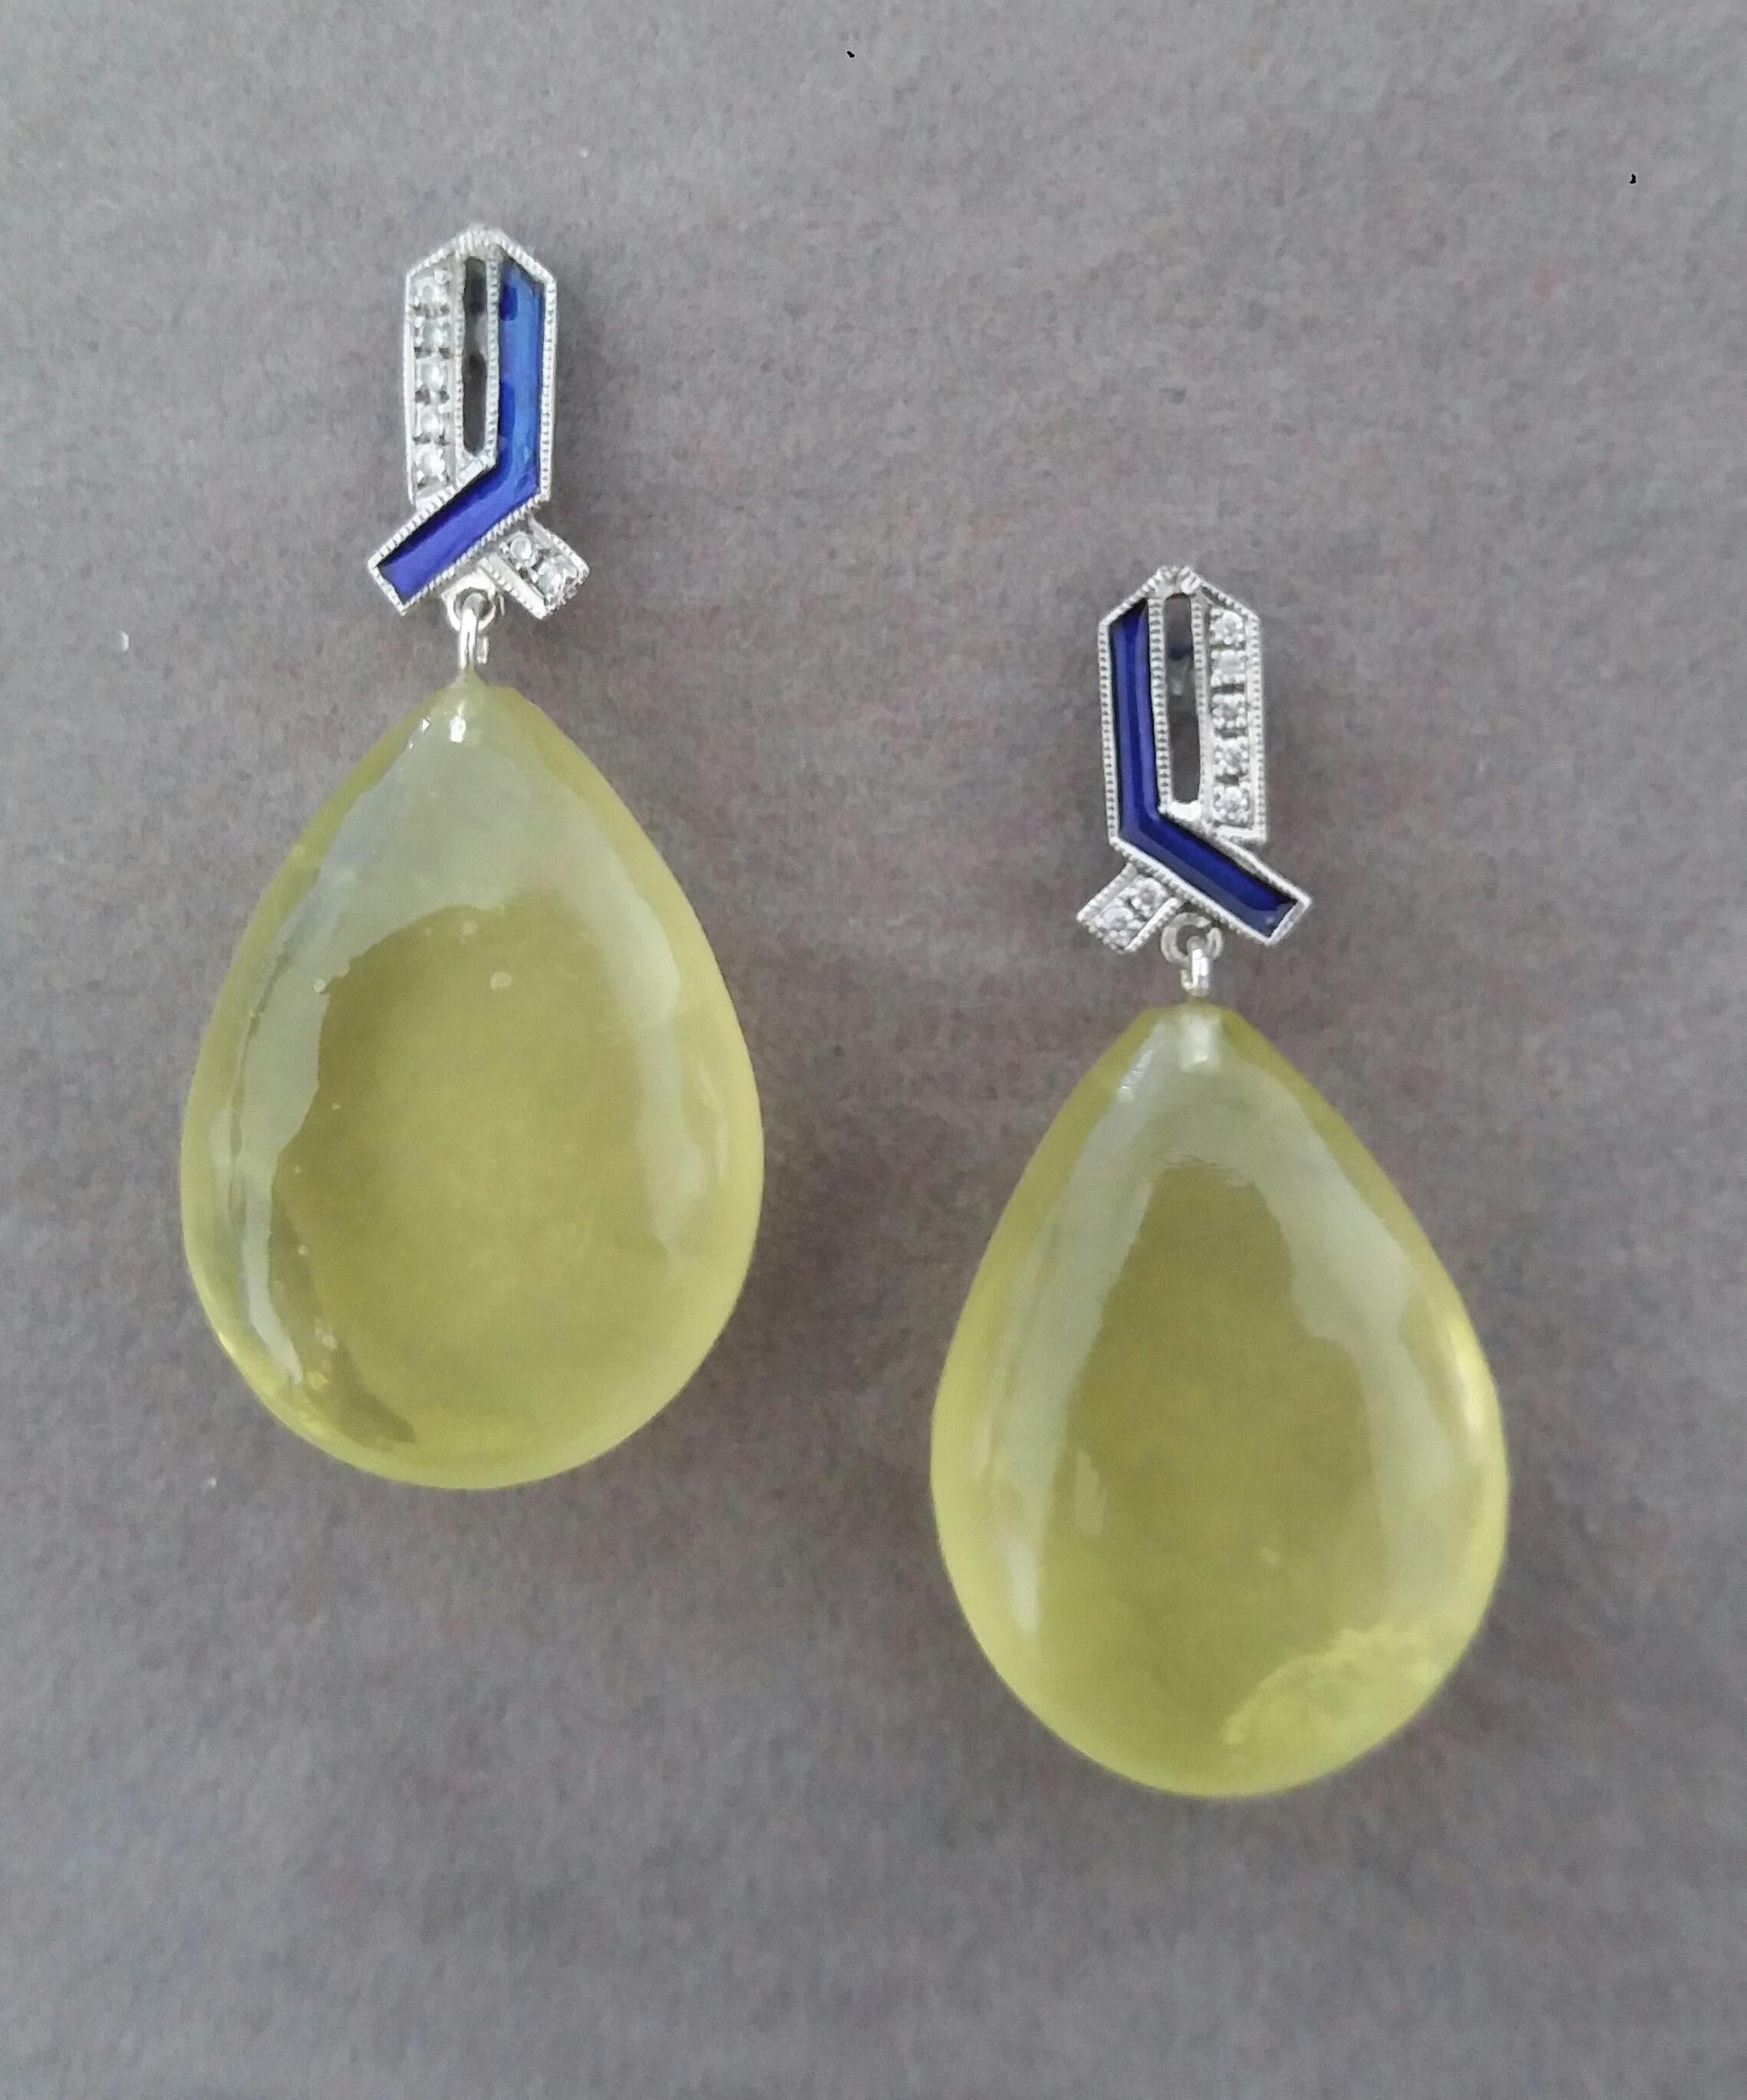 In these Art Deco Style handmade earrings 2 very good quality Natural Lemon Quartz plain drops measuring 18 x 26 mm. are suspended from 2 white 14 kt gold elements tops  with 16 full cut round diamonds and blue Enamels.

In 1978 our workshop started